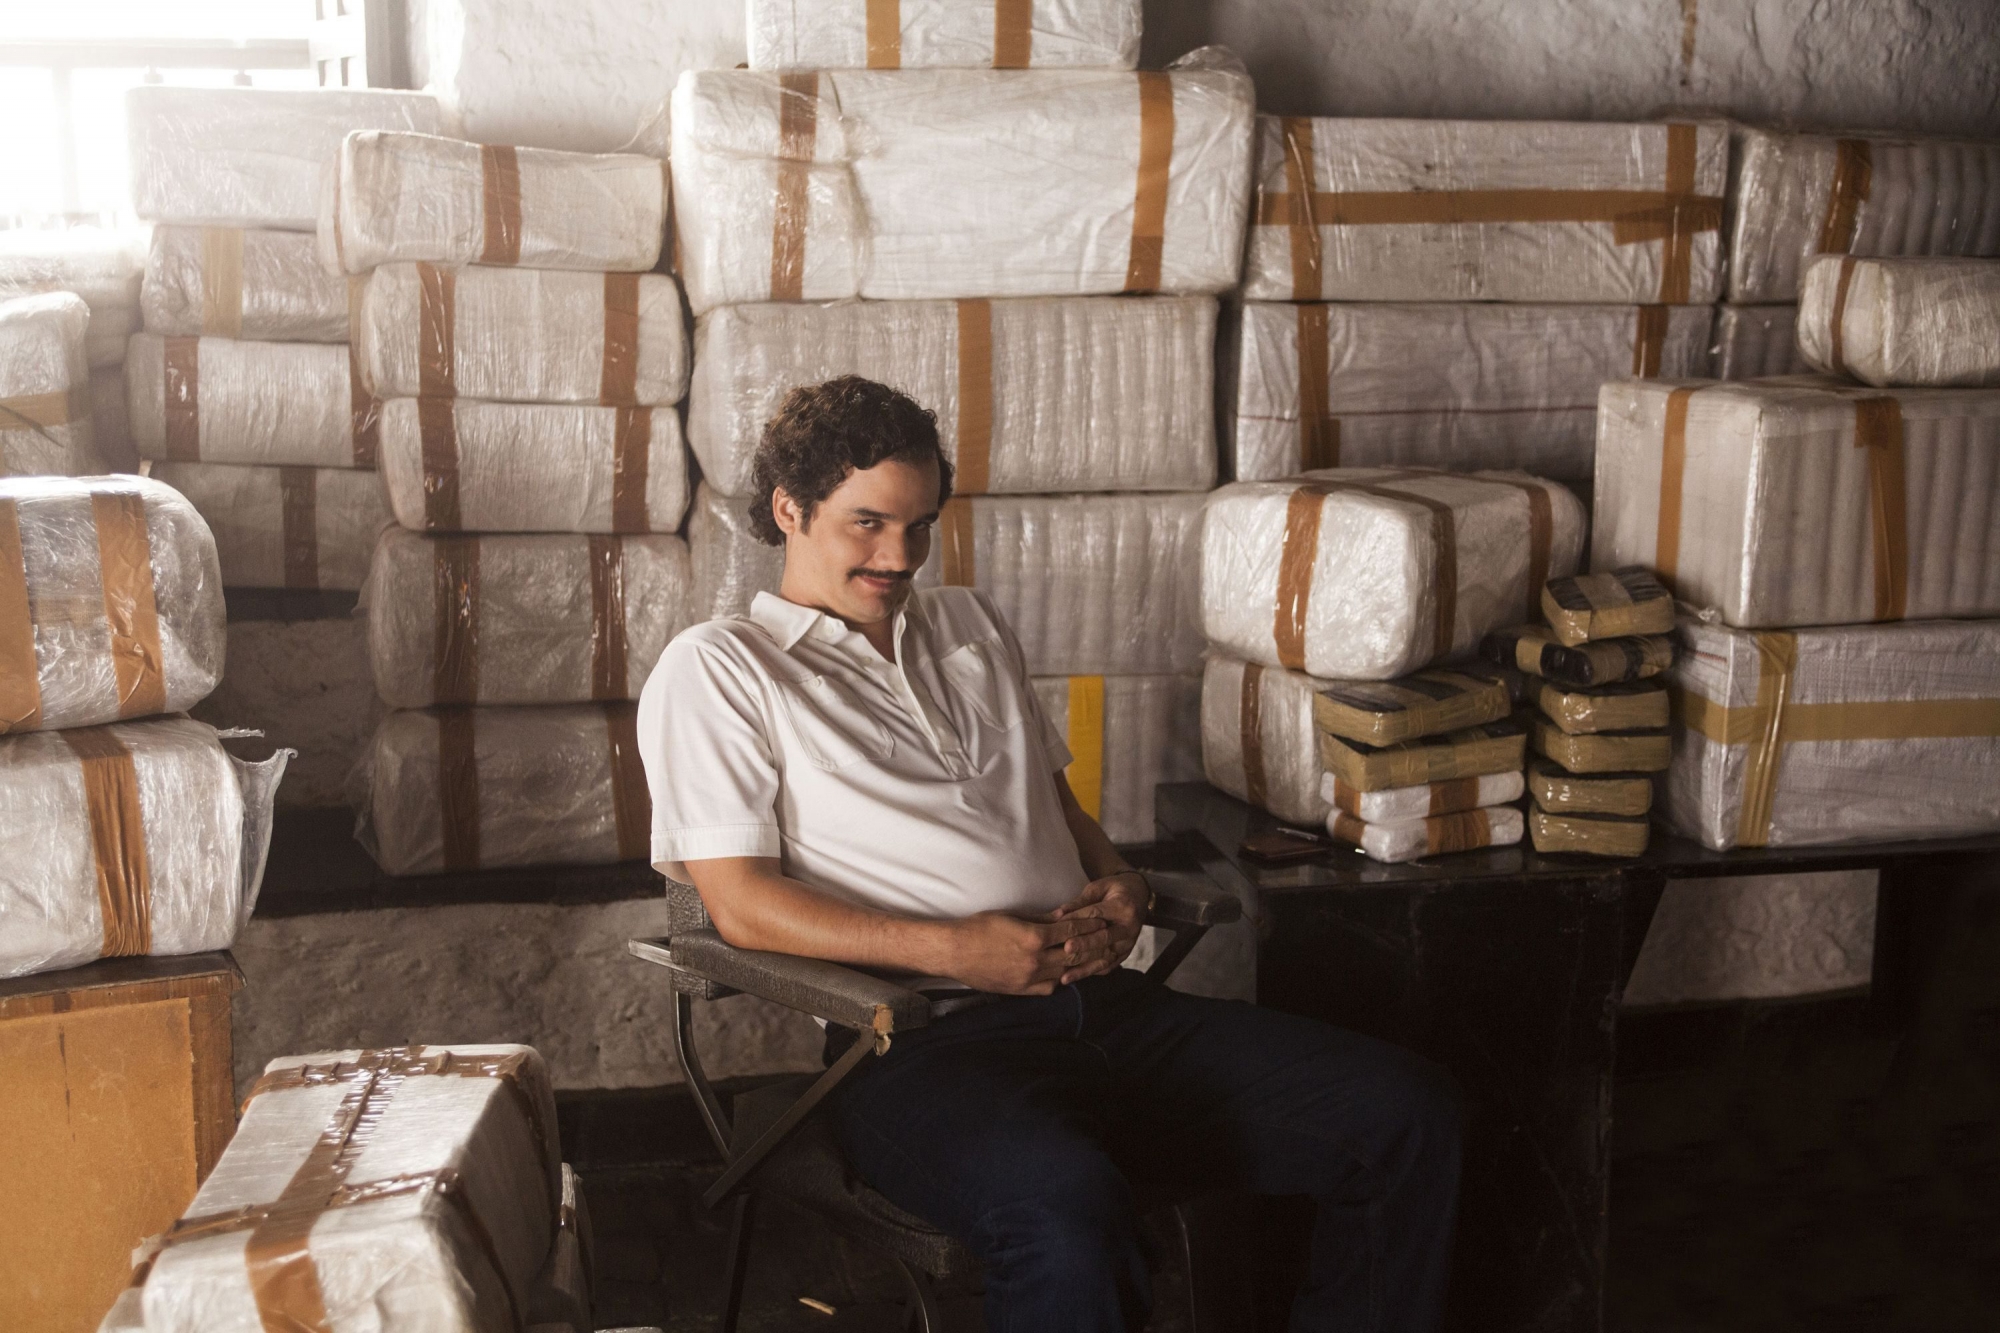 This undated production photo provided by Netflix, shows actor Wagner Moura as Pablo Escobar, in the Netflix Original Series "Narcos." The biopic promises to be an authentic portrayal of Escobar, so itís only natural that Brazilian director and executive producer Jose Padilha chose to film the 10-episode series in Medellin, the murder capital of the world during the drug kingpinís heyday in the 1980s. (Daniel Daza/Netflix via AP) KOLUMBIEN FILM "NARCOS"